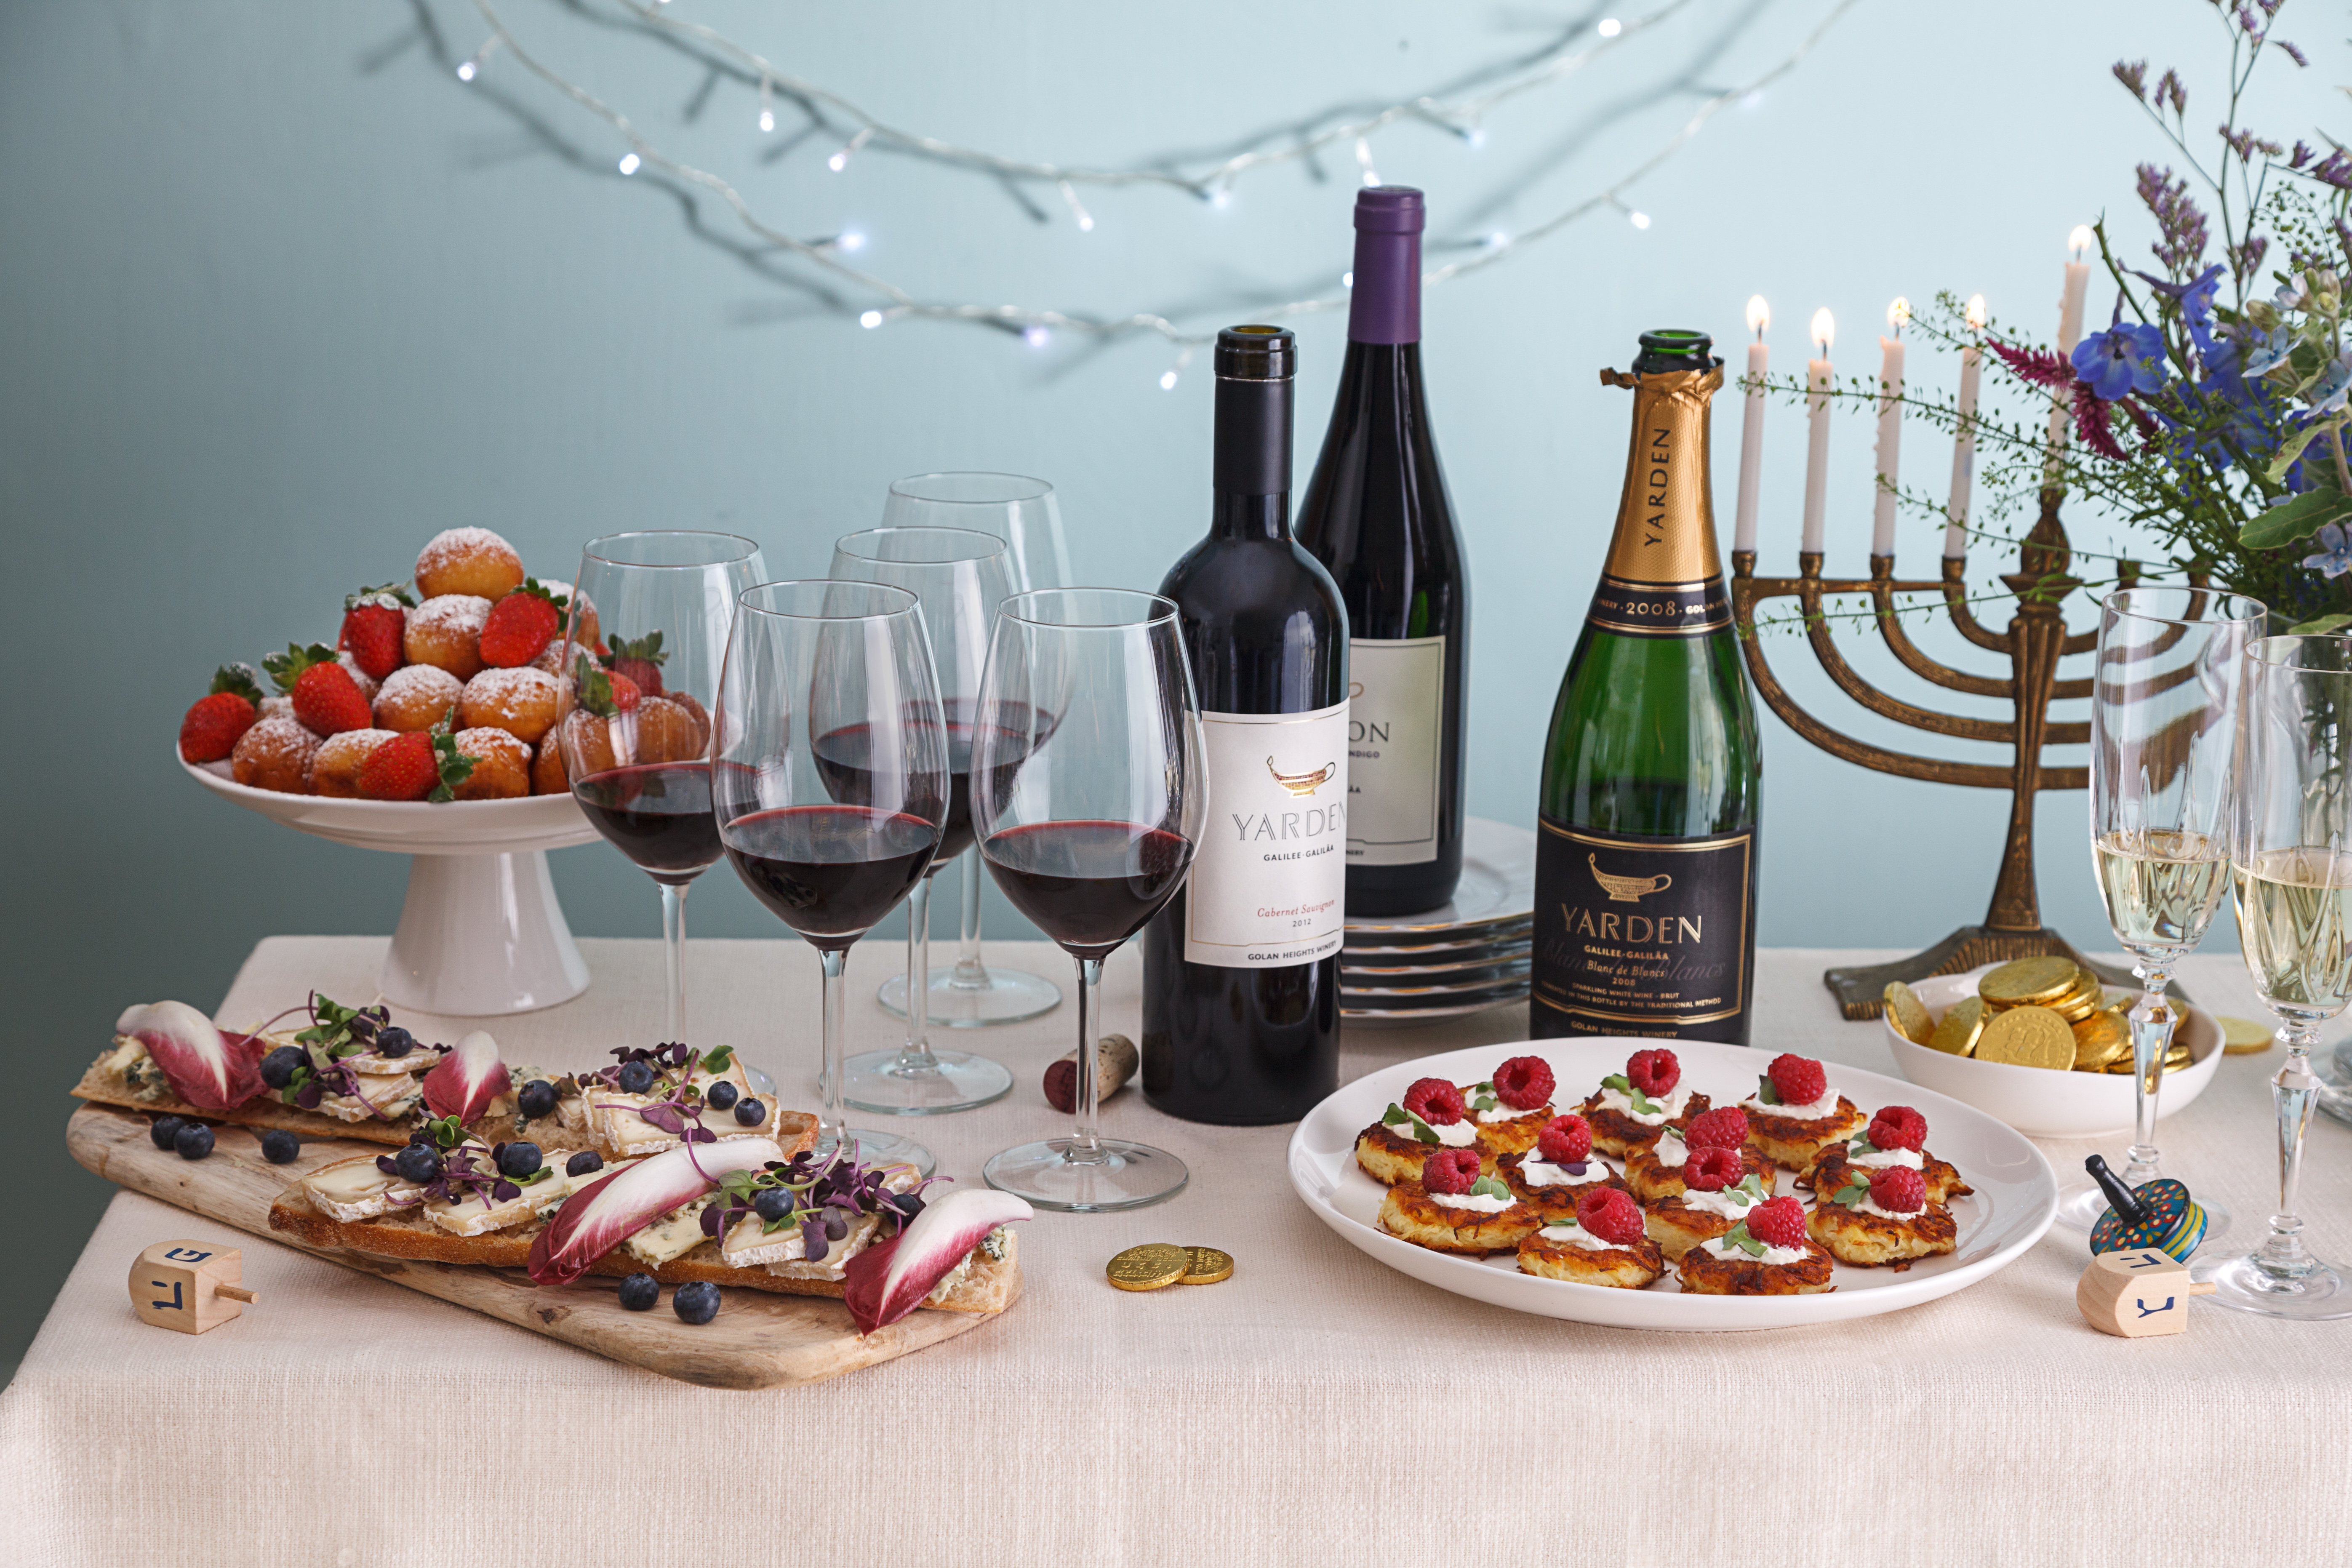 Hanukkah Food & Wine Pairing Guide Just In Time For The Holidays